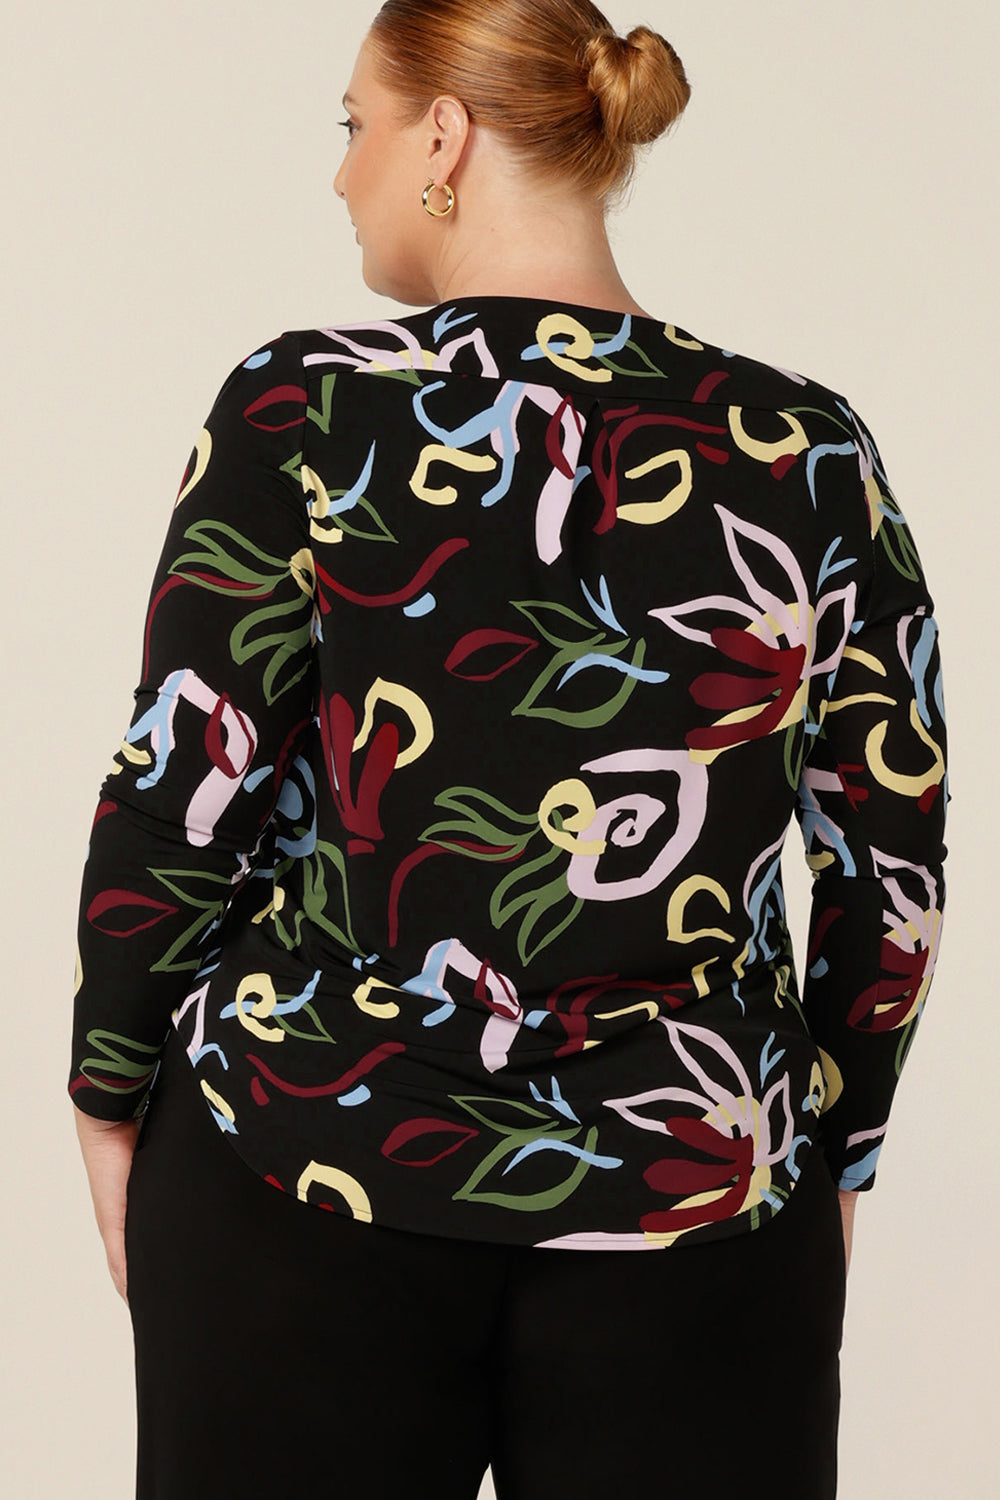 Back view of a round neck, long sleeve work top for plus size and fuller figure women. In an abstract print with black base, this comfortable top is made in Australia in an inclusive 8-24 size range.